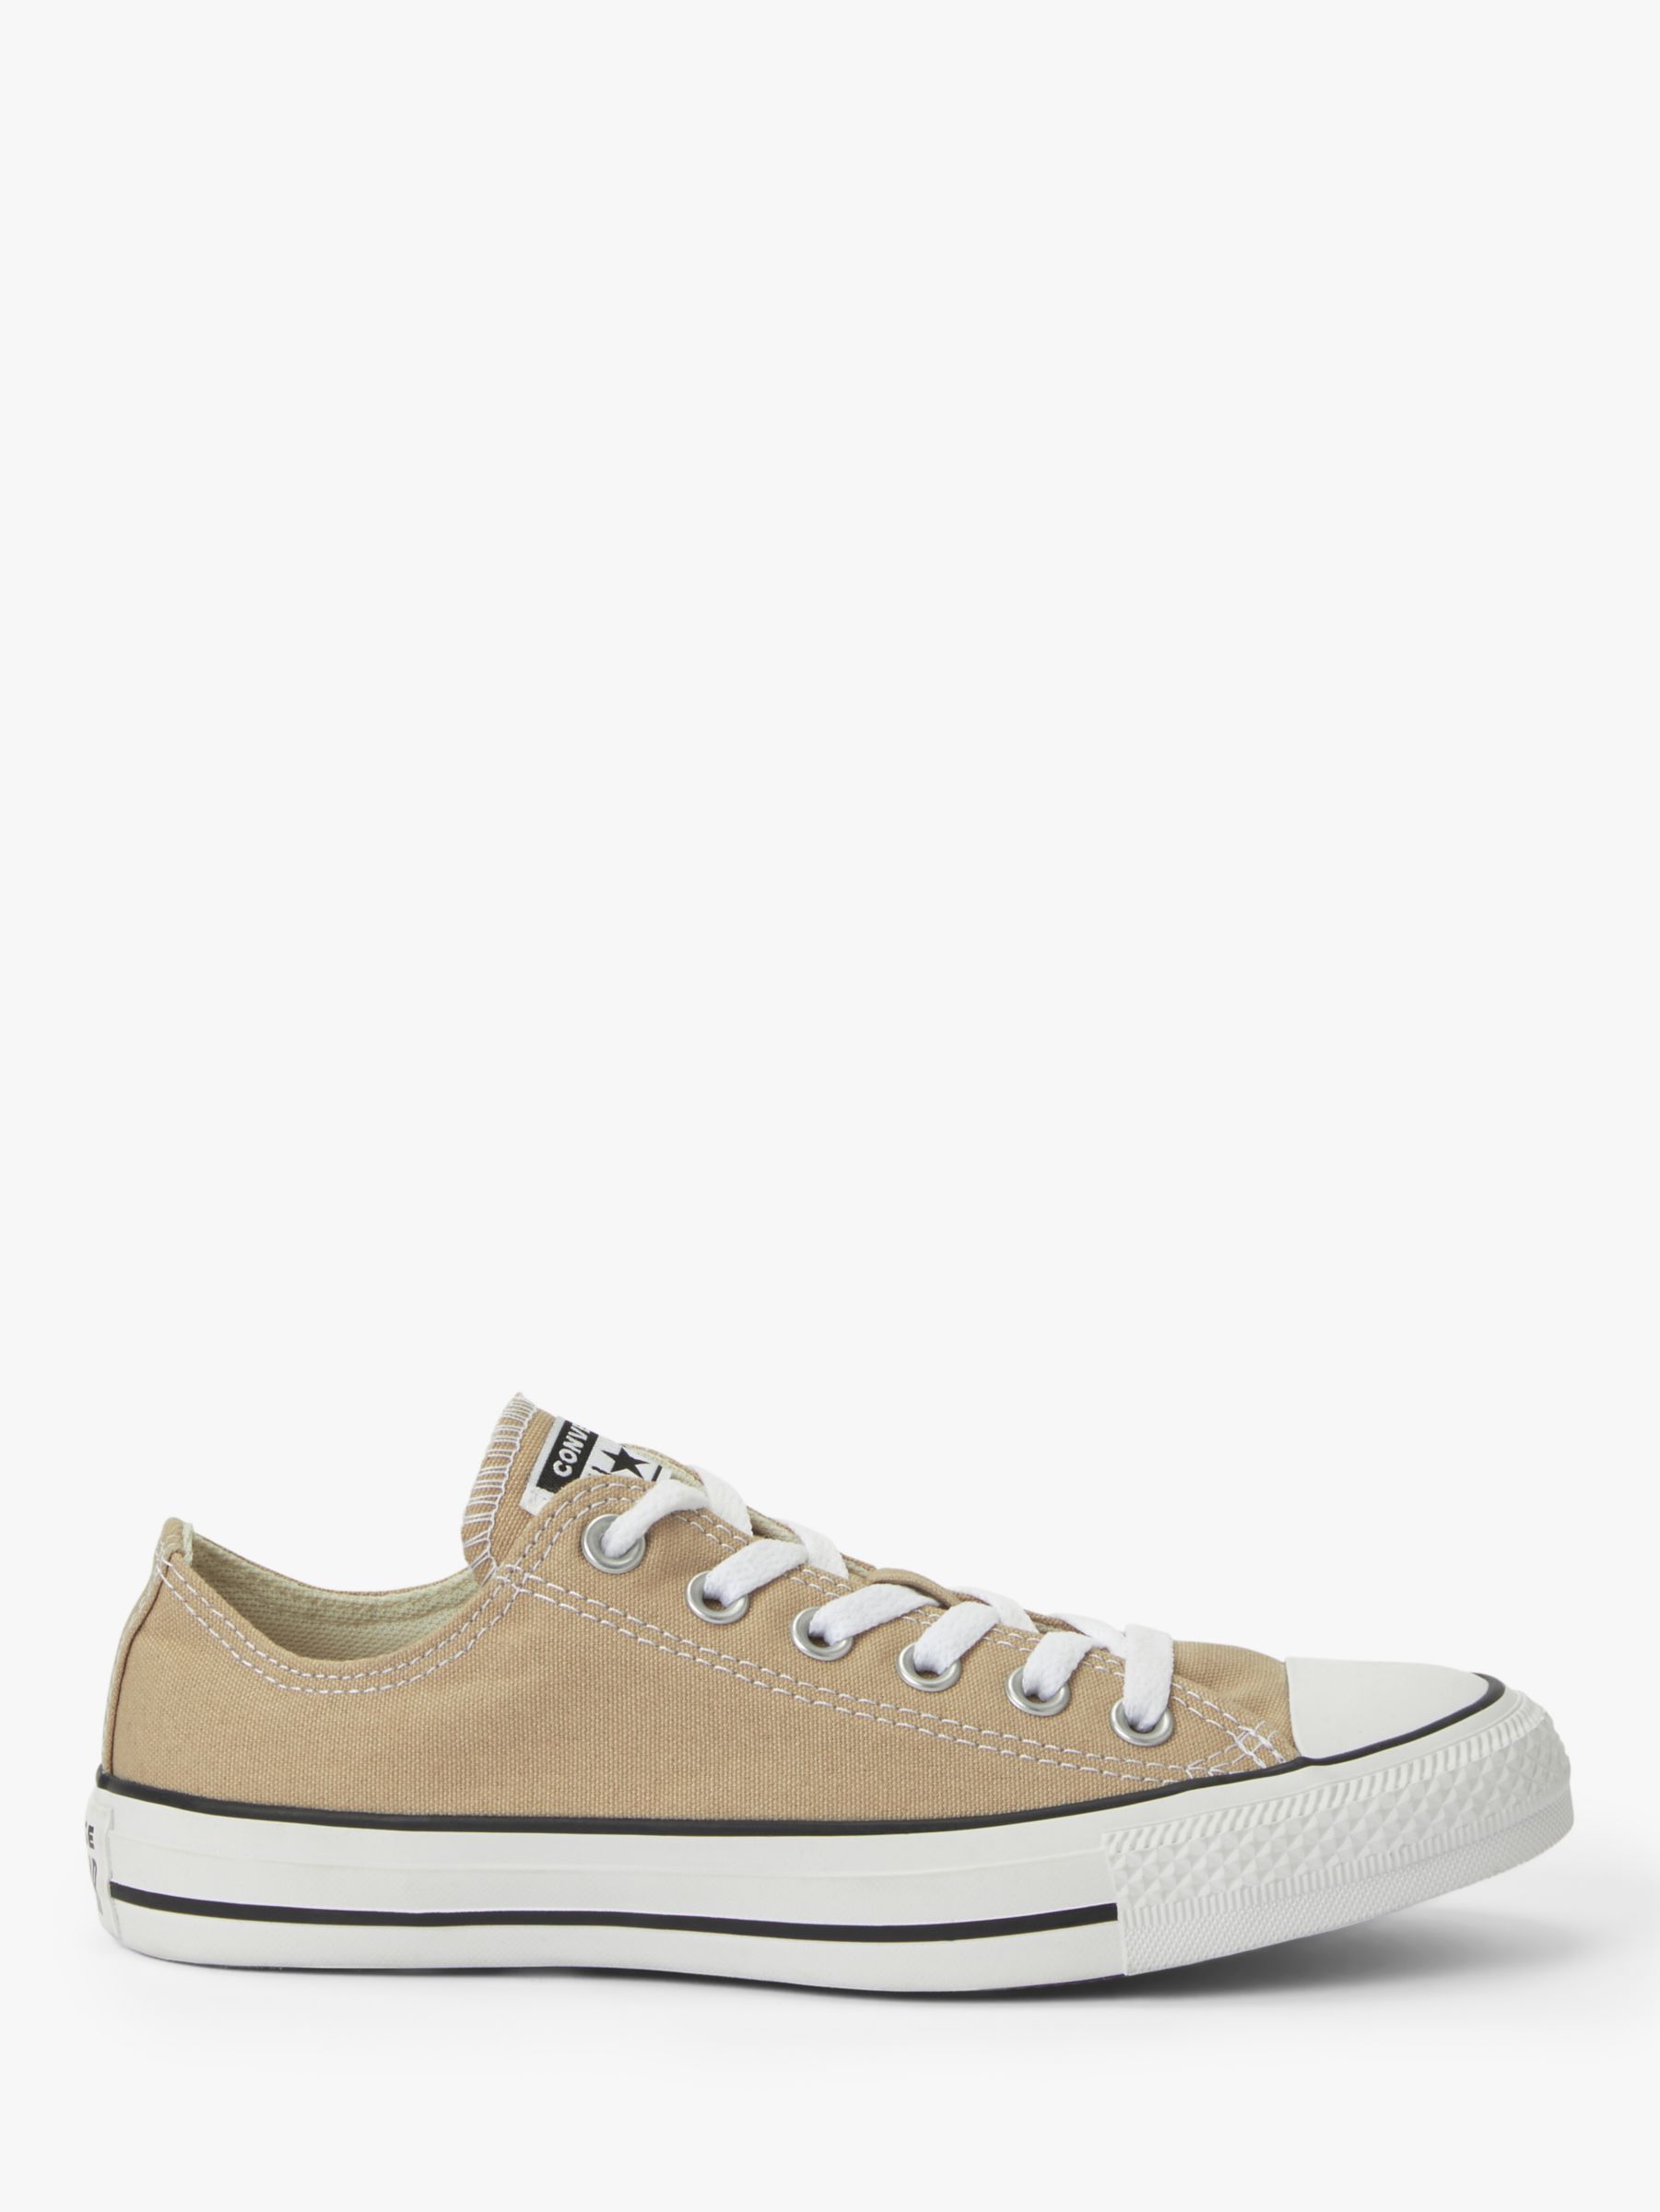 converse chuck taylor all star ox low